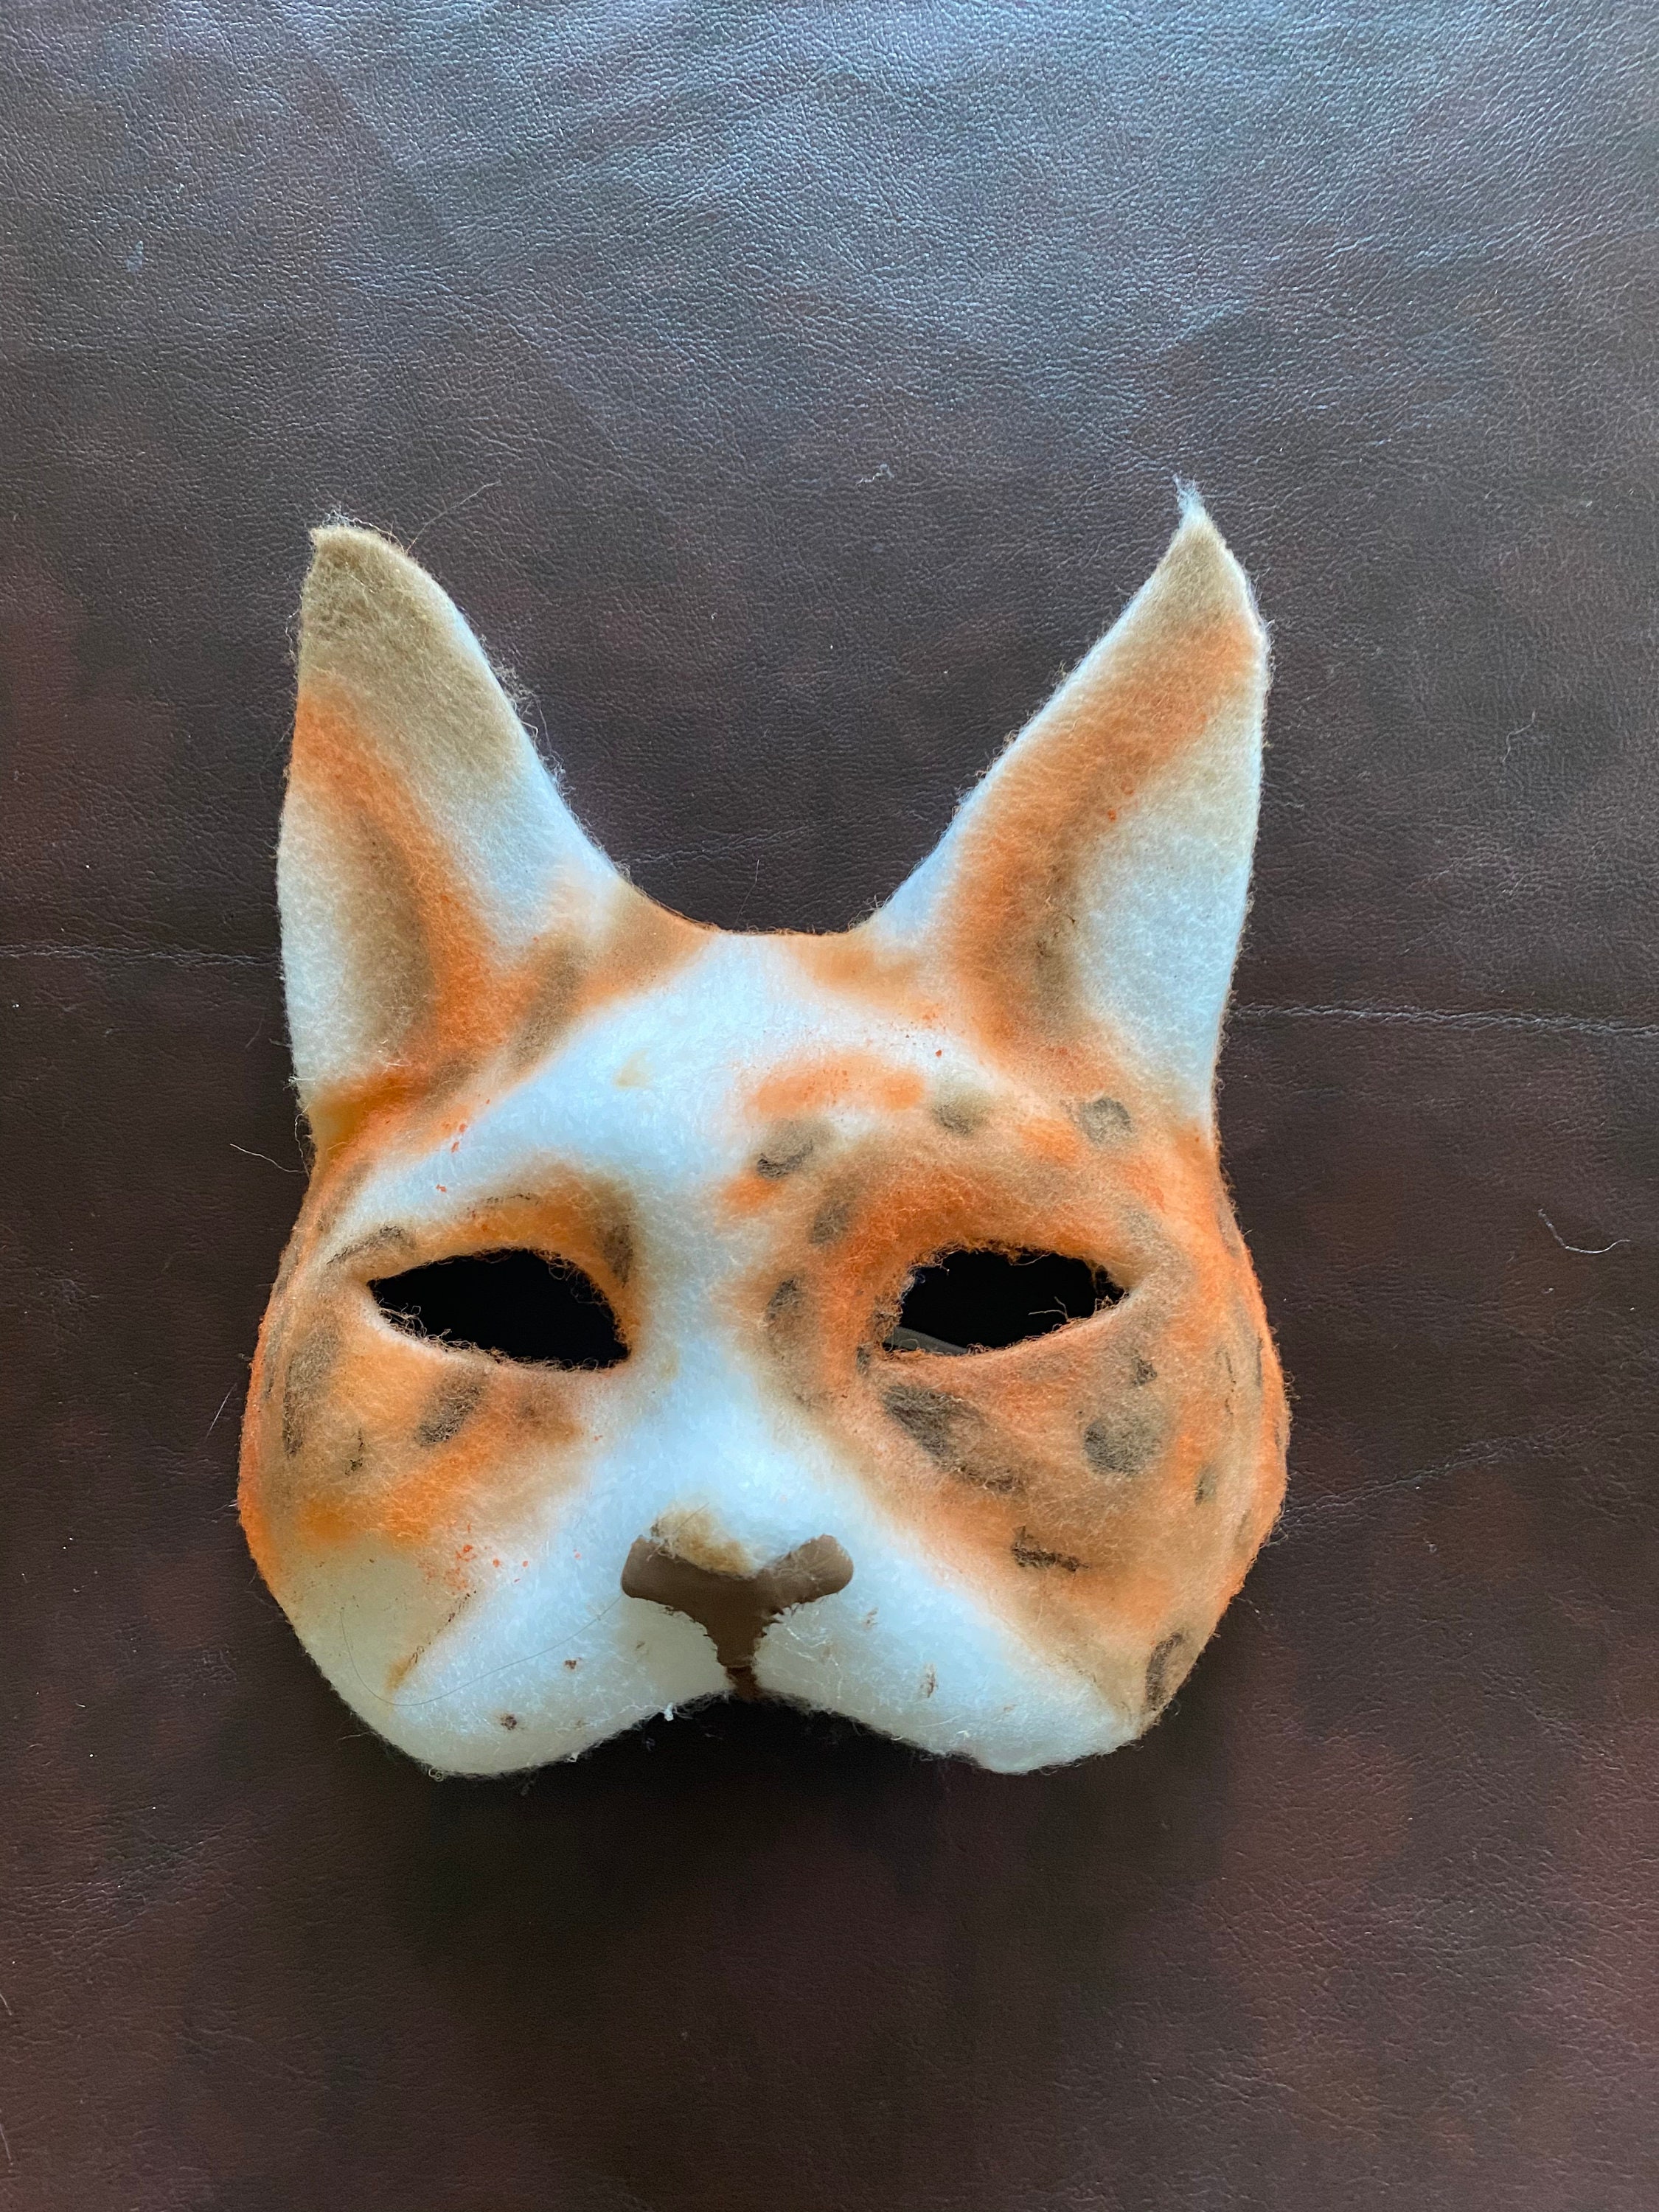 Cat Therian Mask for Sale by sophiacutepets